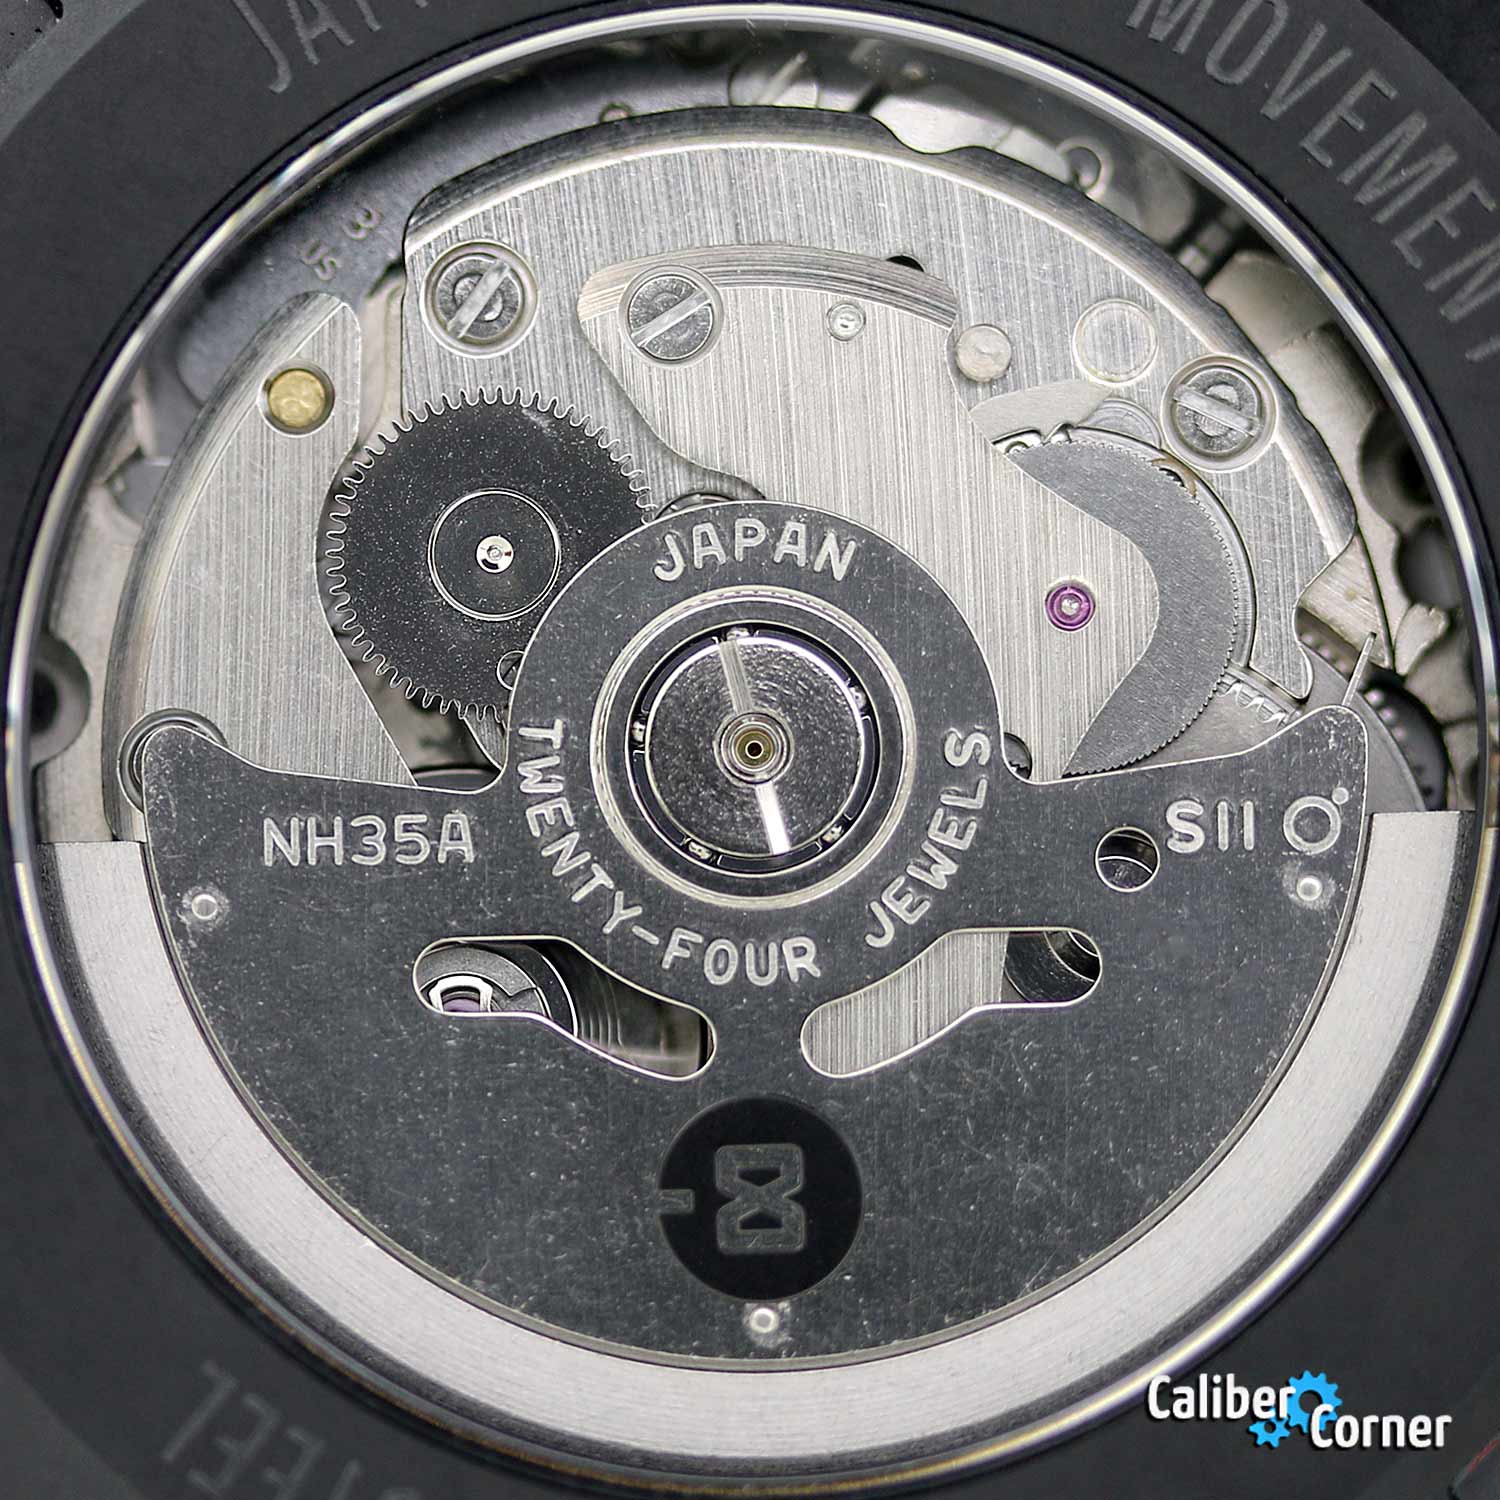 Seiko caliber NH35A SII automatic watch movement in a Minus-8 Layer